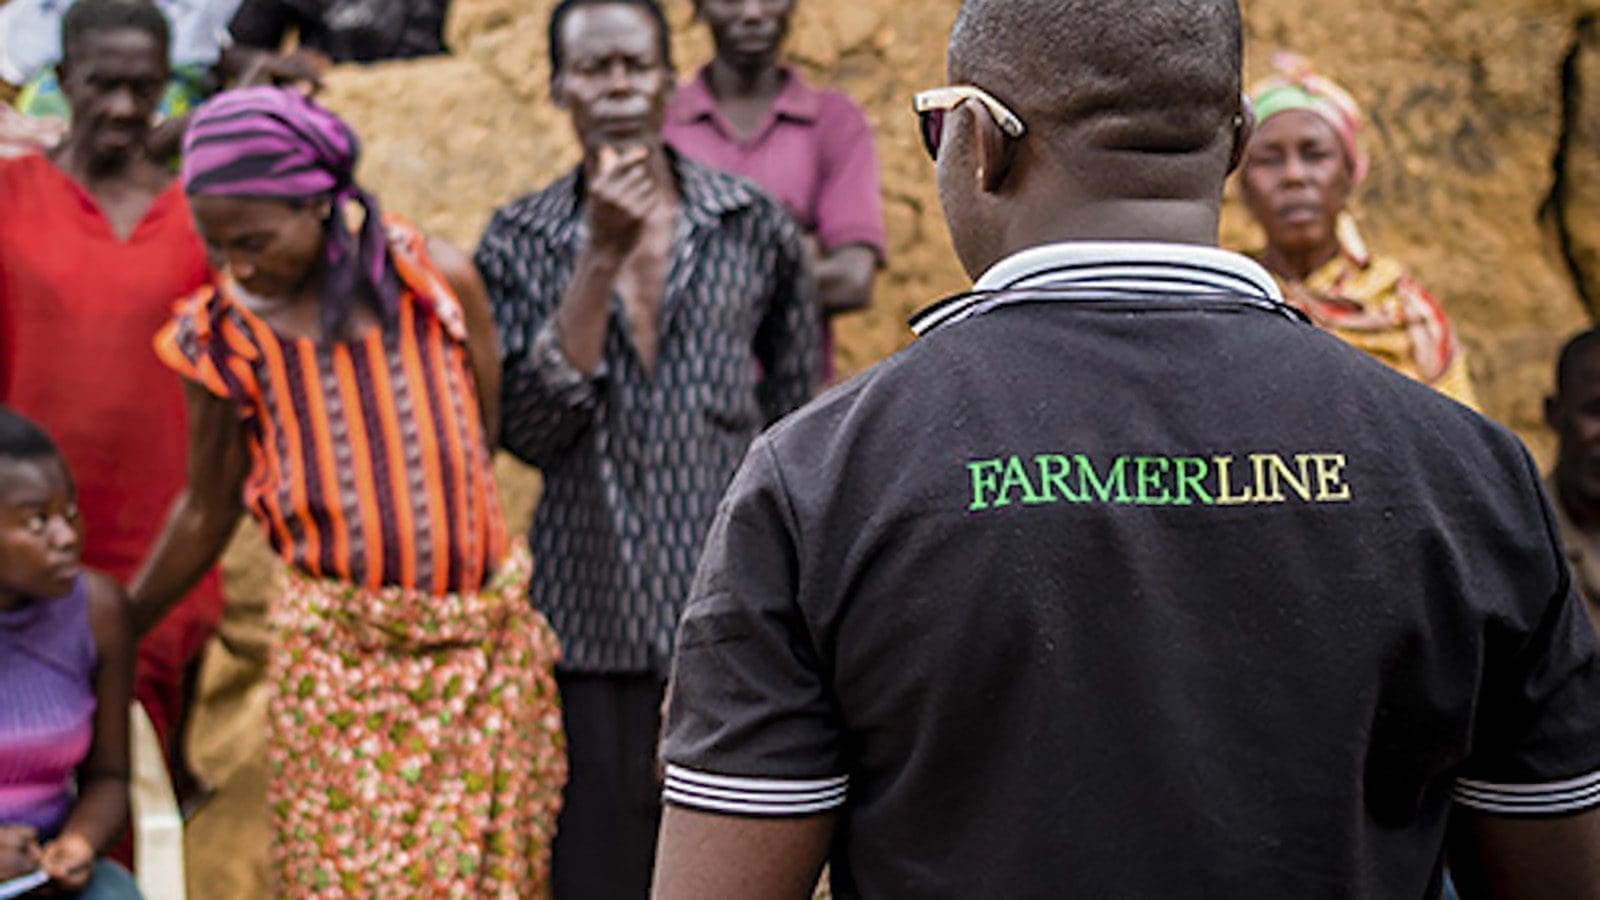 Farmerline secures US$12.9m investment to scale its technology aimed to drive agribusiness